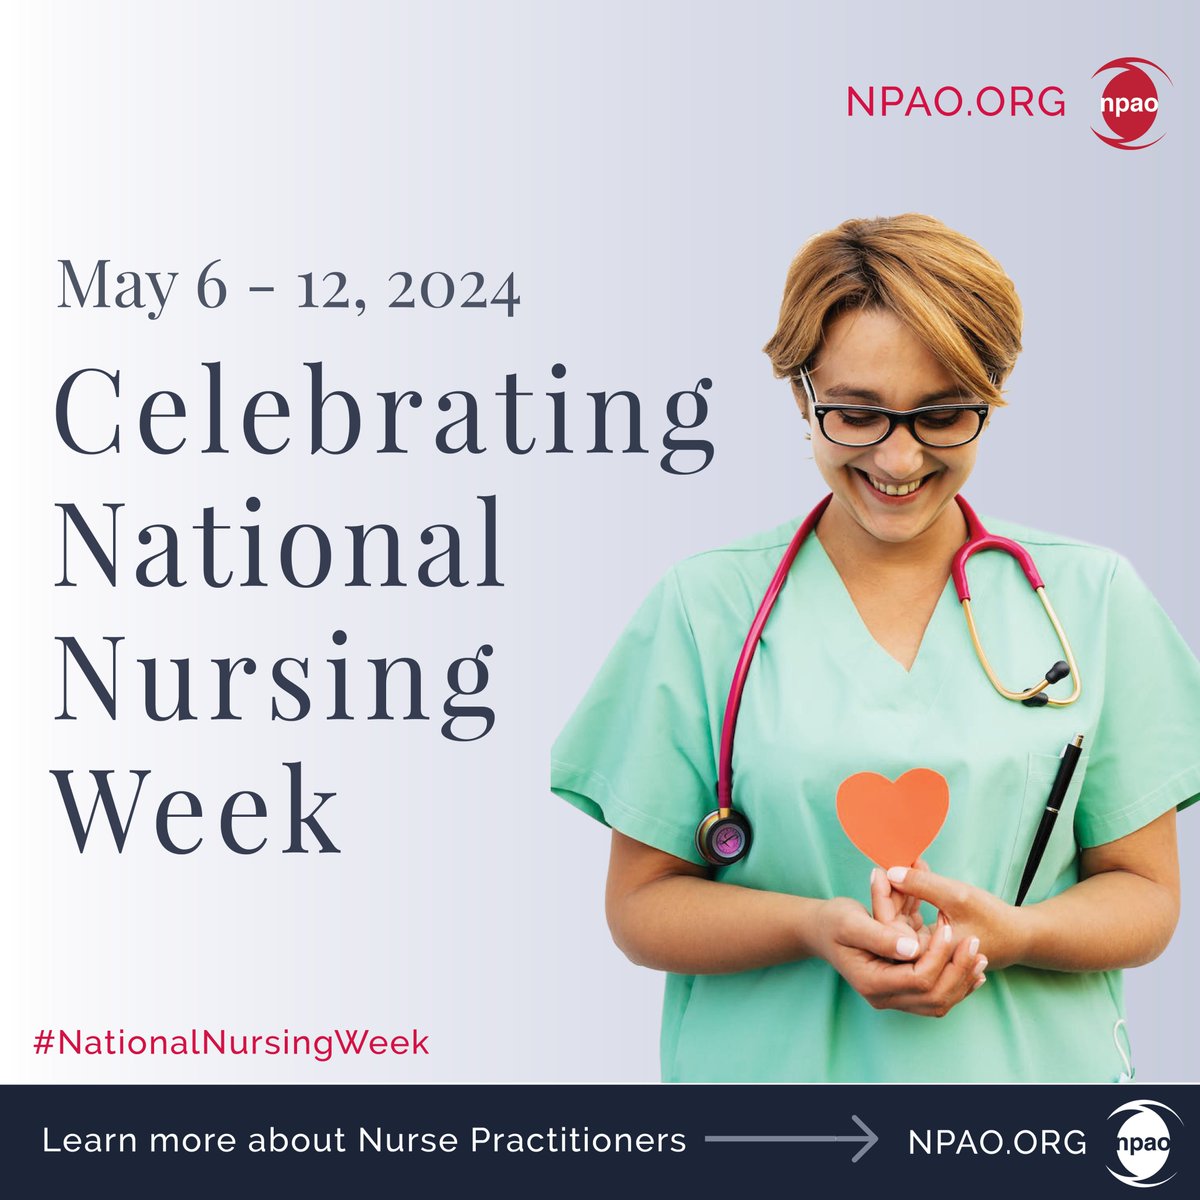 Nurses Week 2024 | On May 6th to 12th, let's celebrate the incredible dedication and compassion of nurses everywhere. Thank you for your tireless commitment to improving patient health and wellbeing. Learn more about Nurse Practitioners (NPs) at npao.org